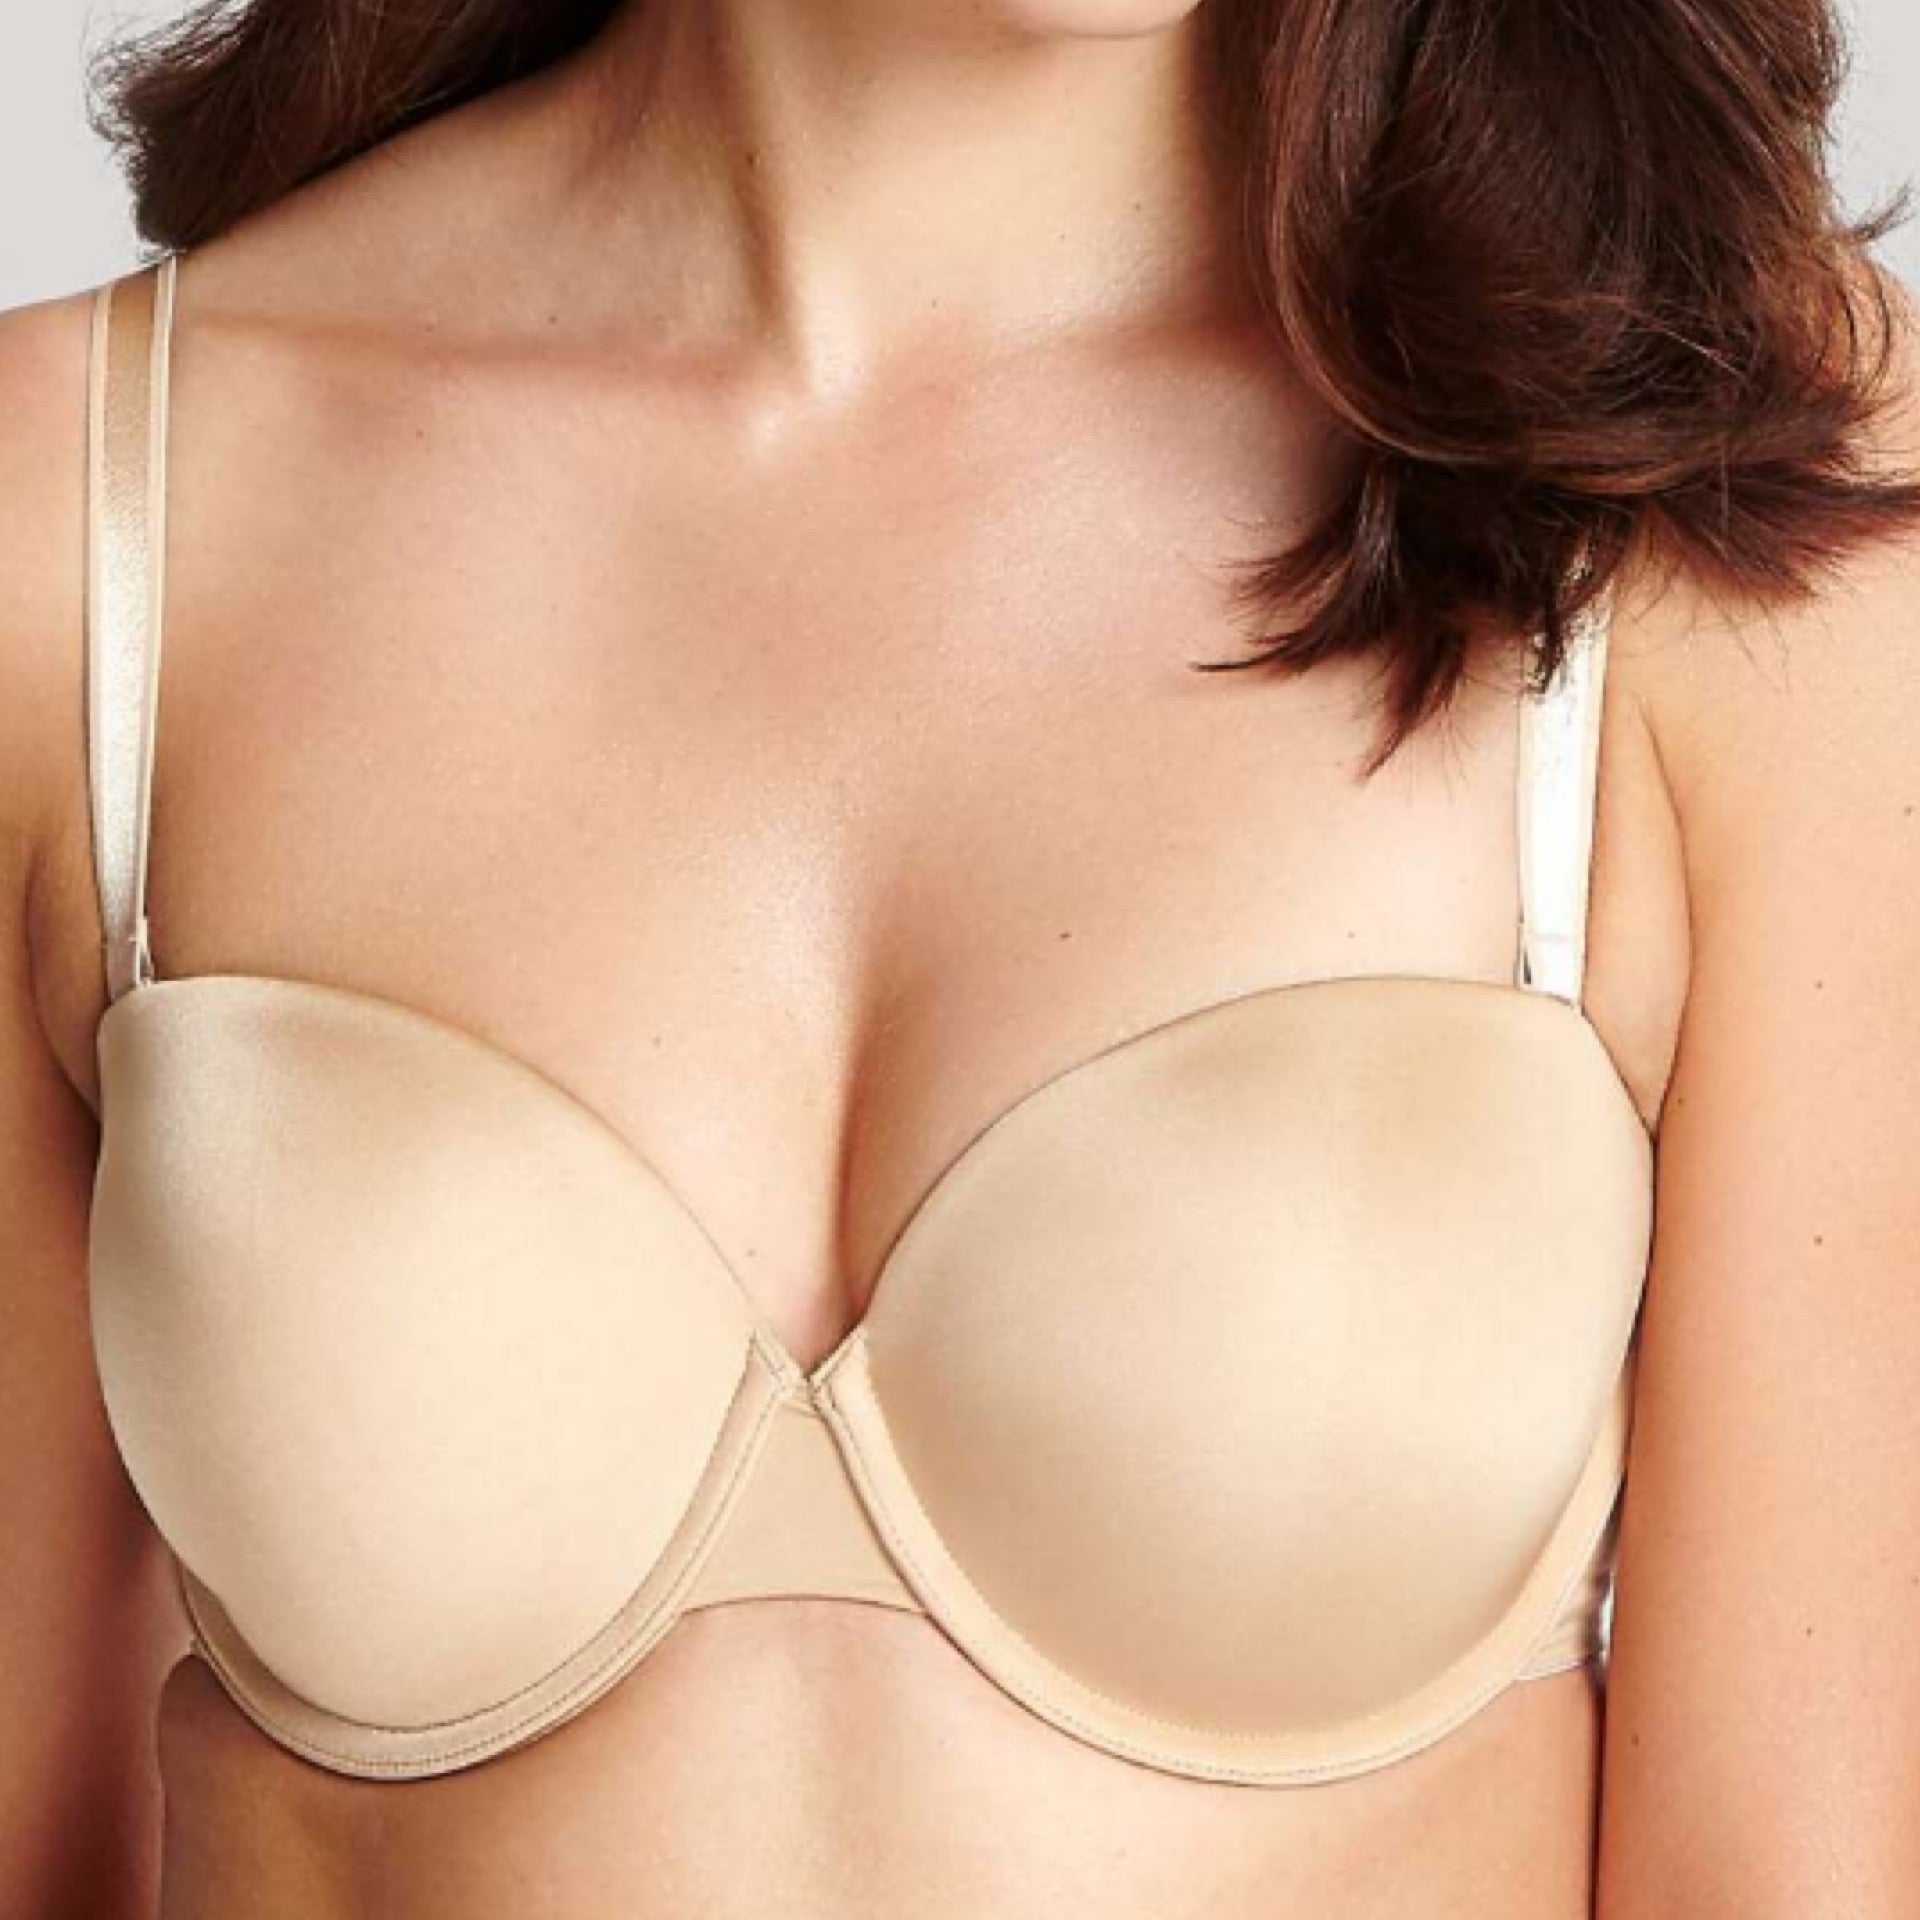 Elomi Smoothing Underwire Foam Moulded Strapless Bra - Bras